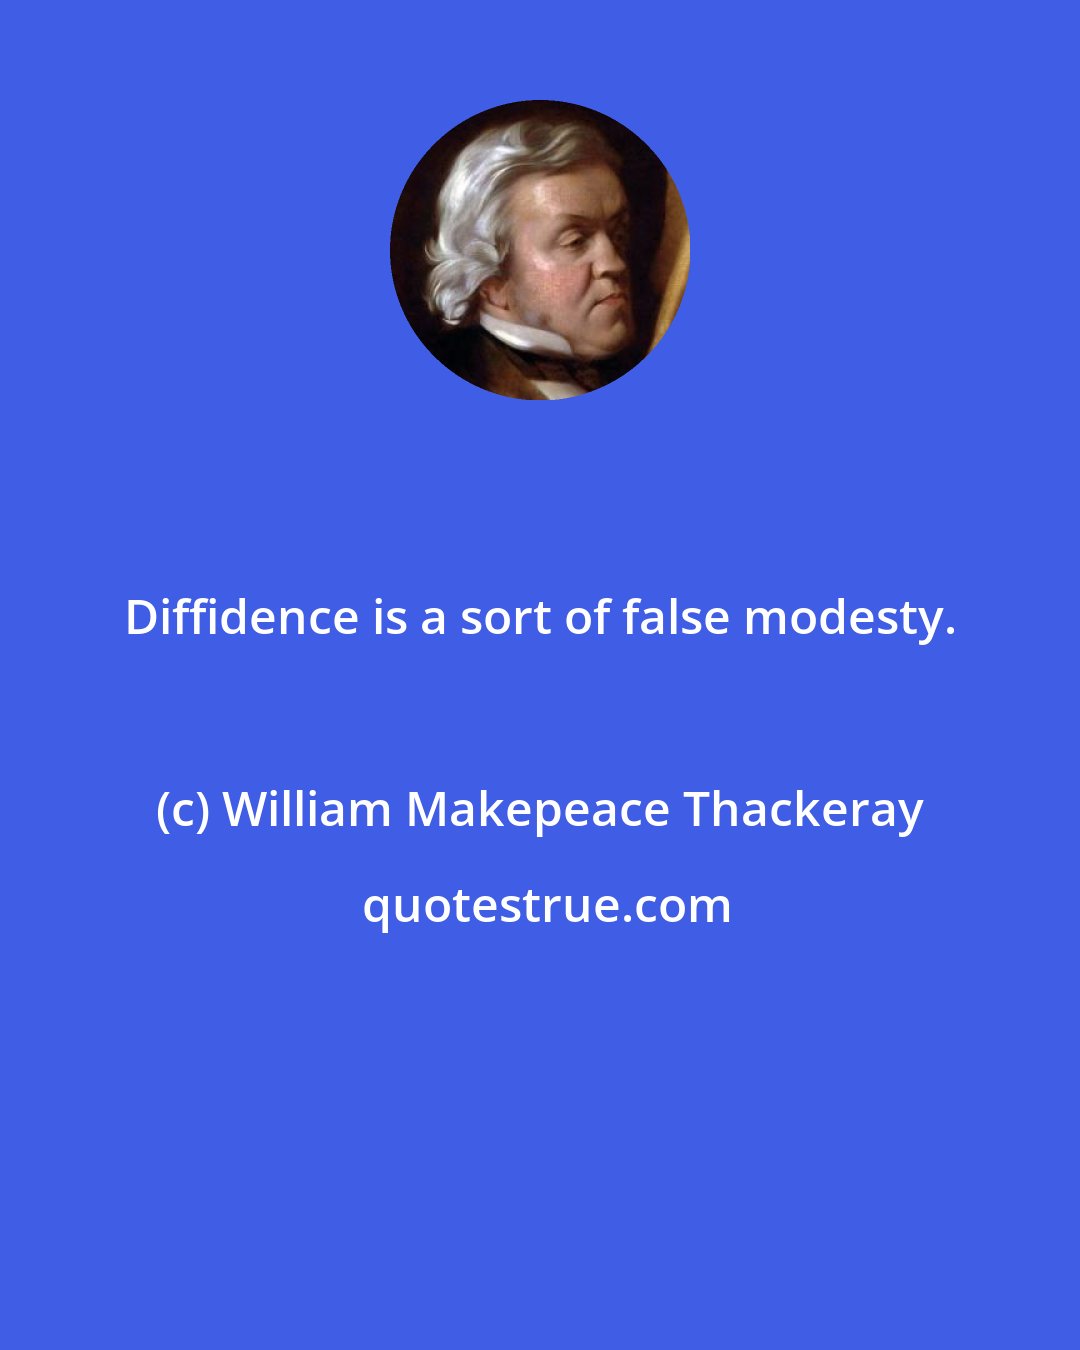 William Makepeace Thackeray: Diffidence is a sort of false modesty.